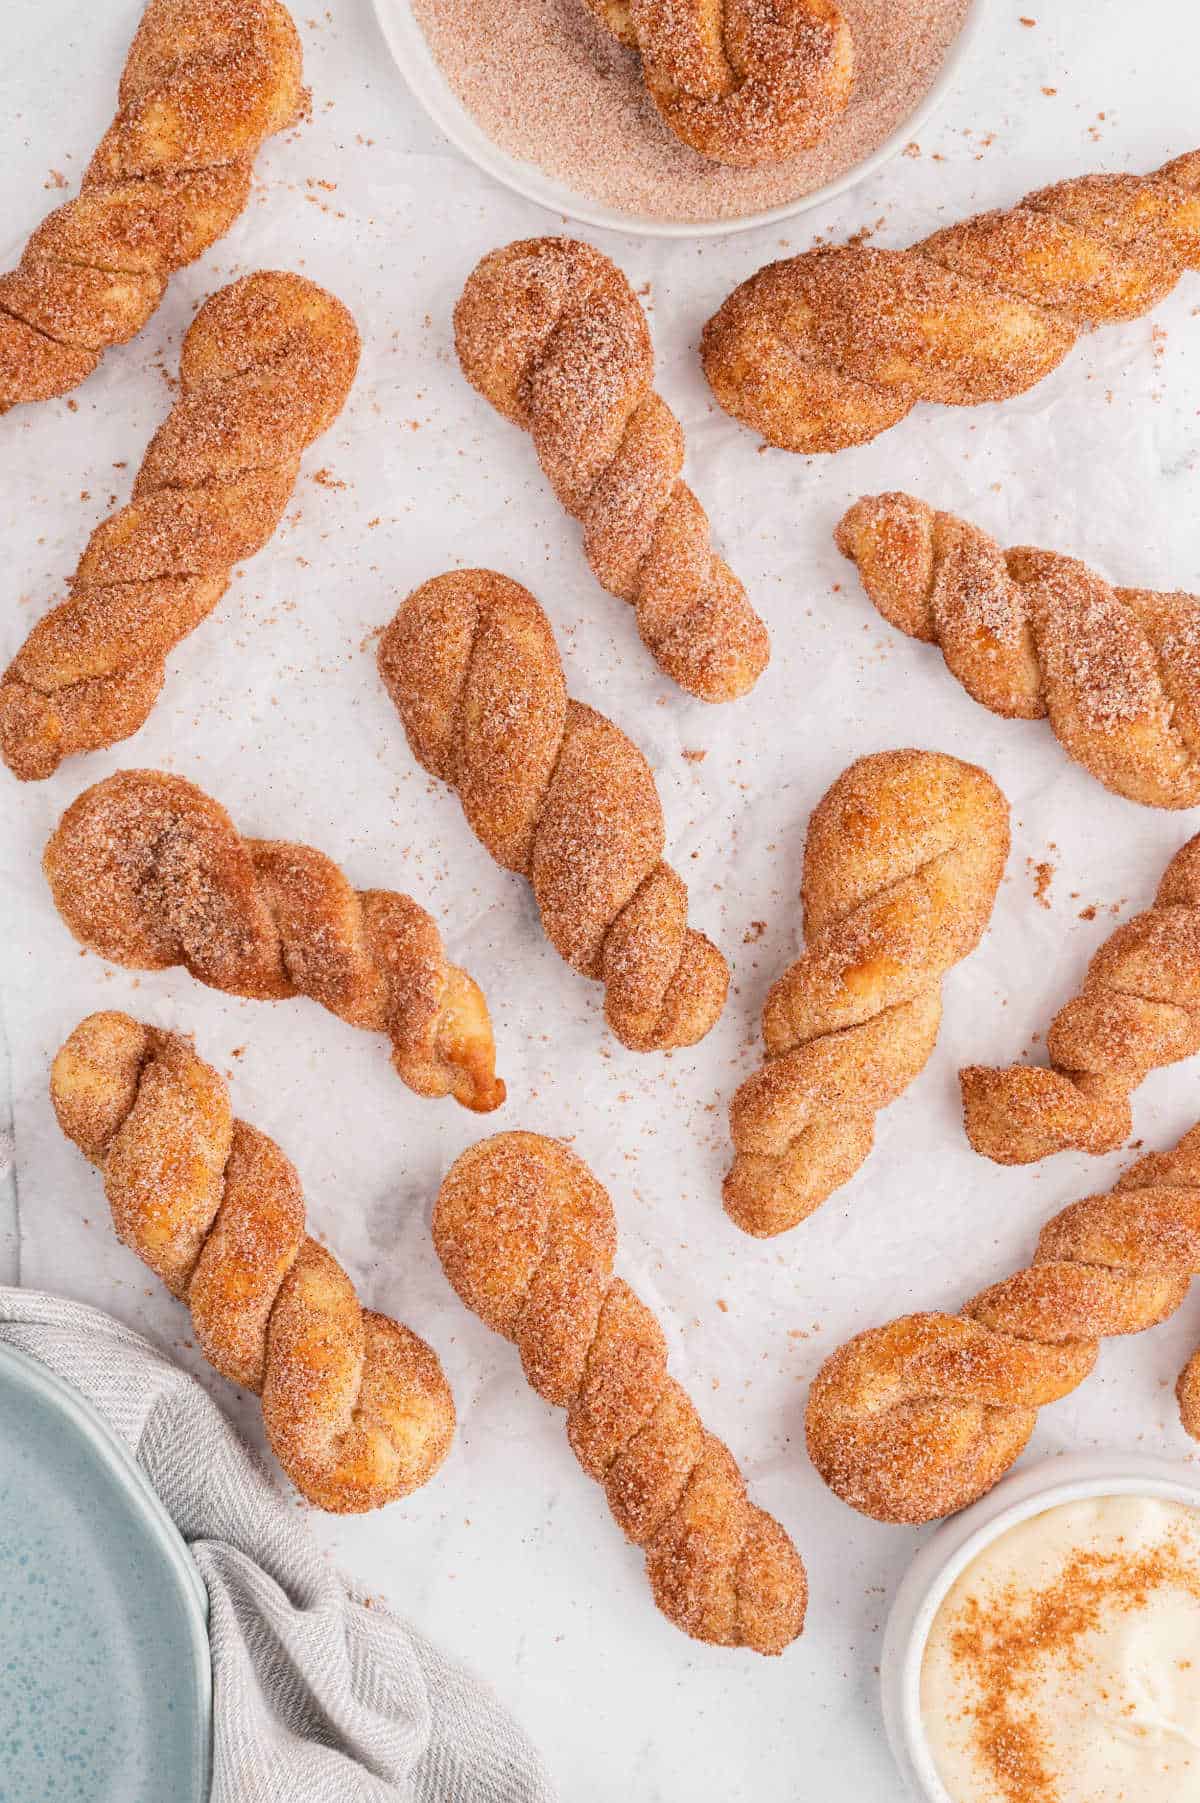 Air fryer cinnamon twists on a white surface.